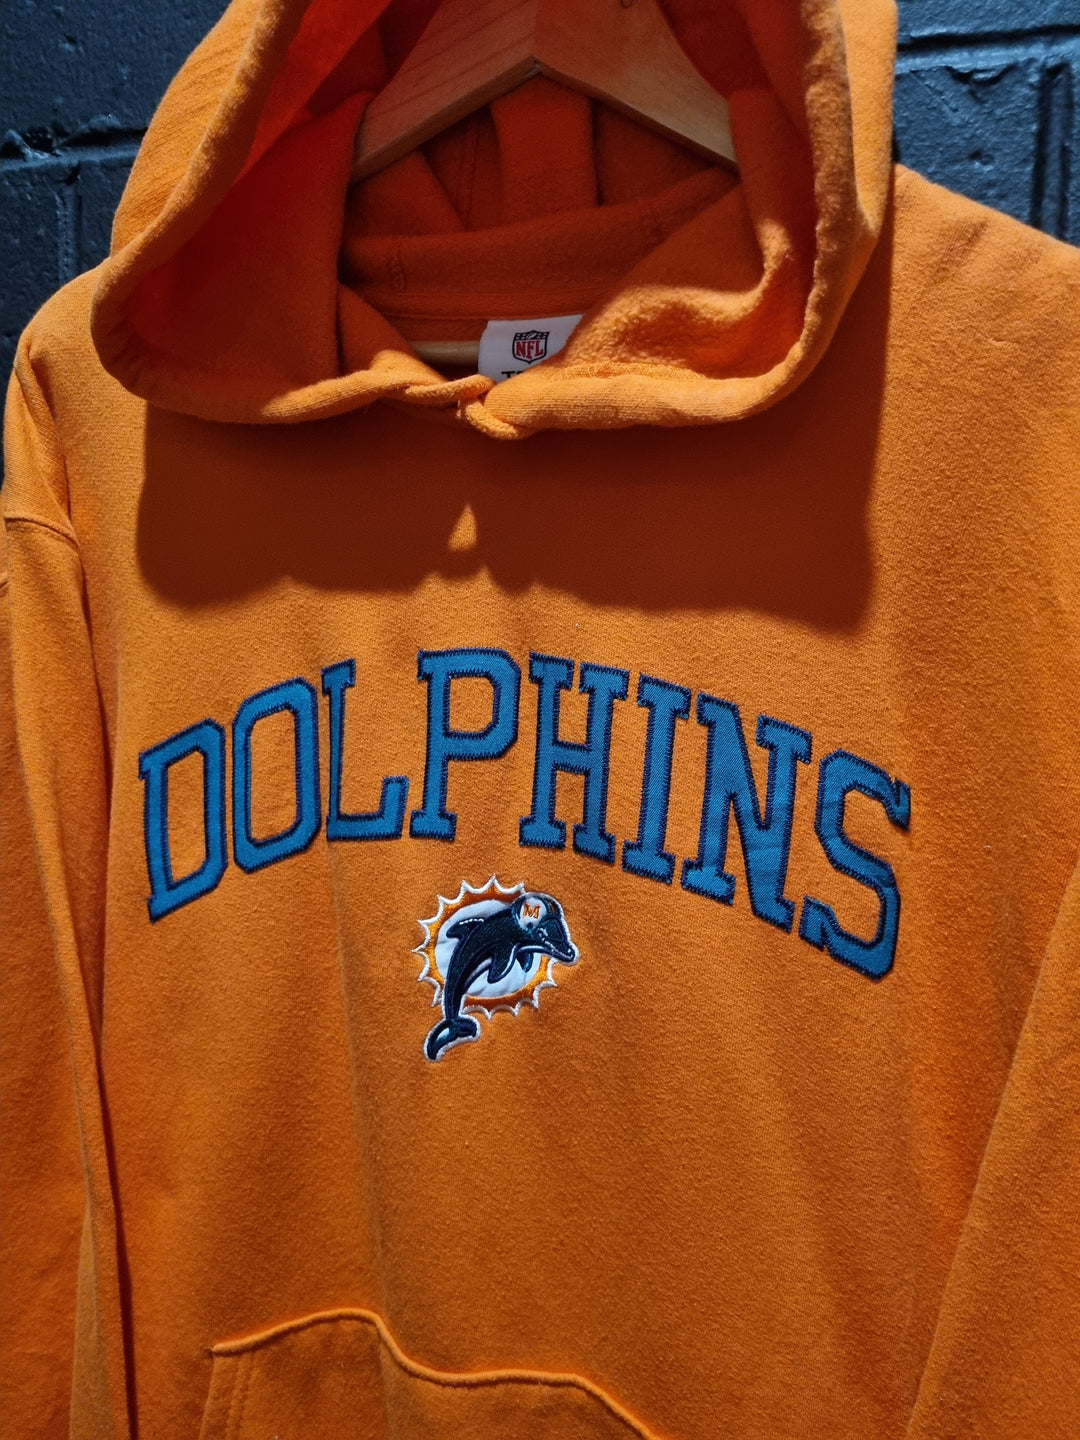 Miami Dolphins NFL Apparal Hoodie XL